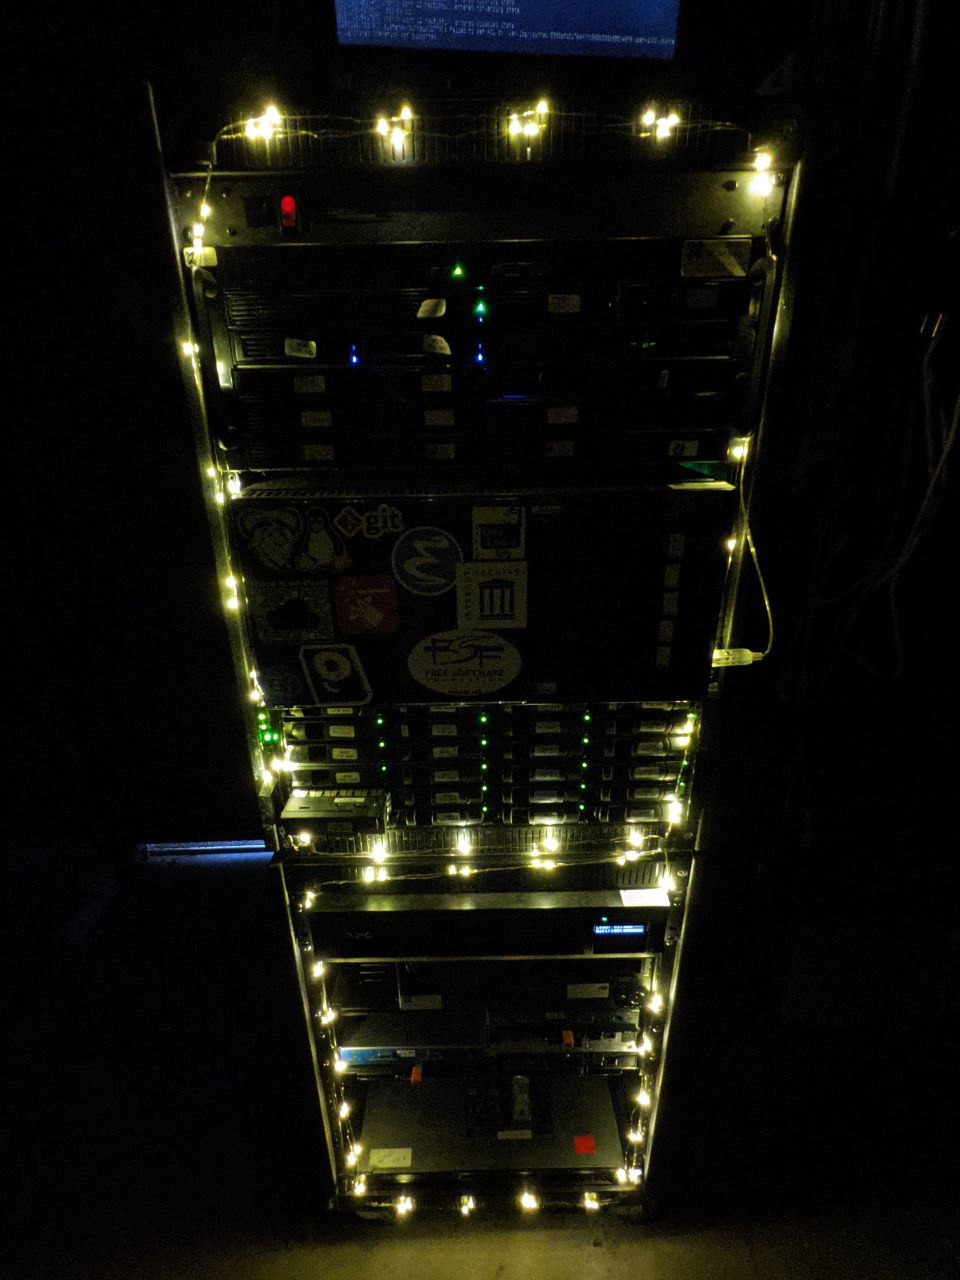 Server rack in a dark room with christmas lights.